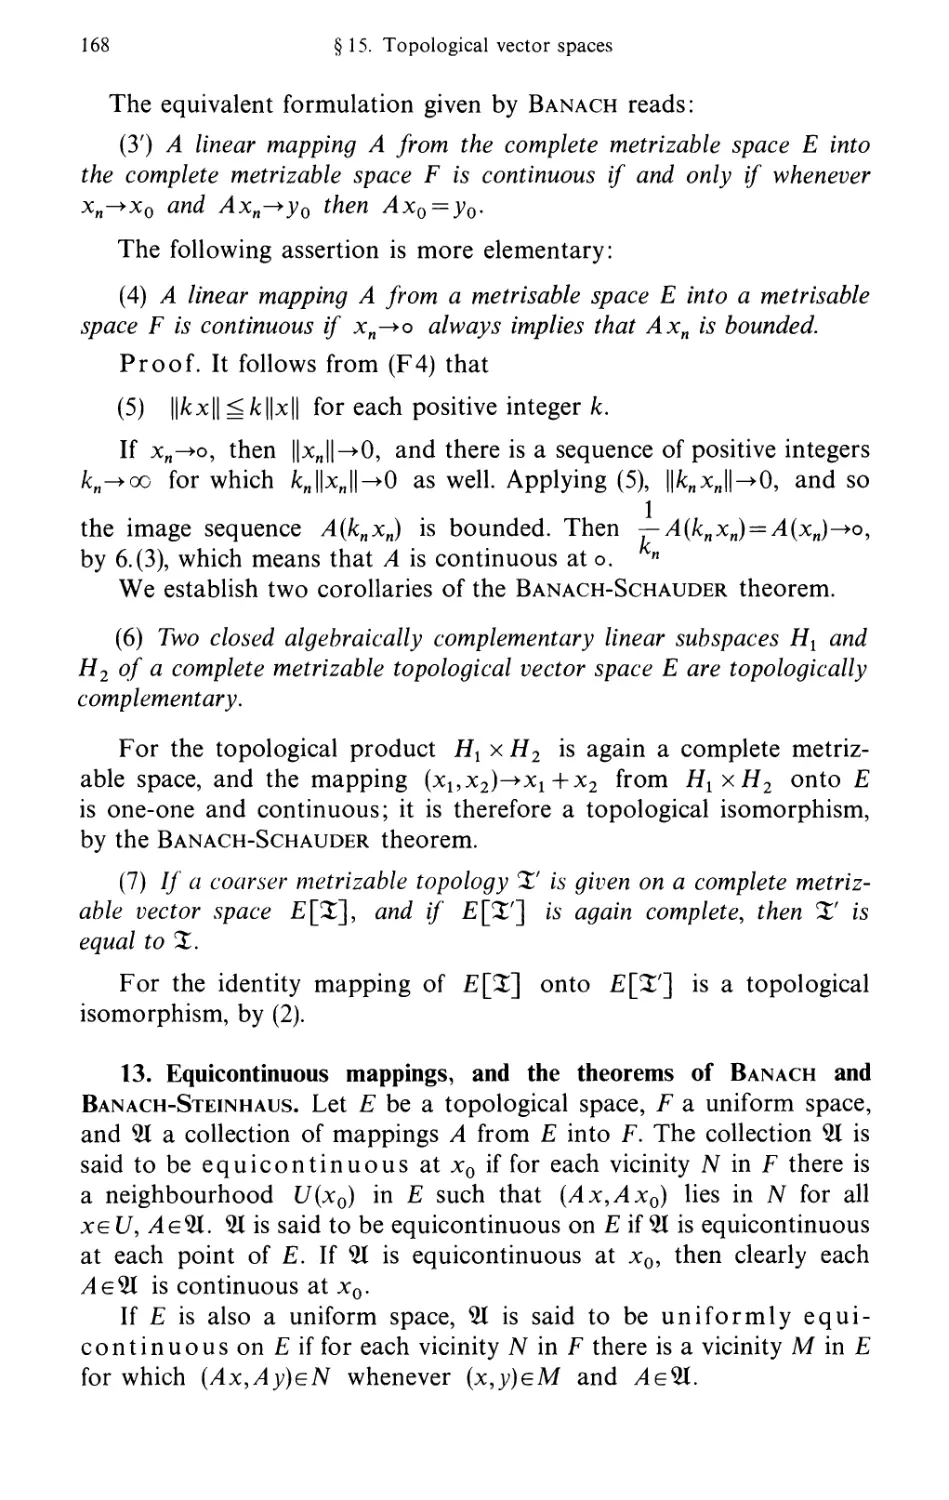 13. Equicontinuous mappings, and the theorems of Banach and Banach-Steinhaus